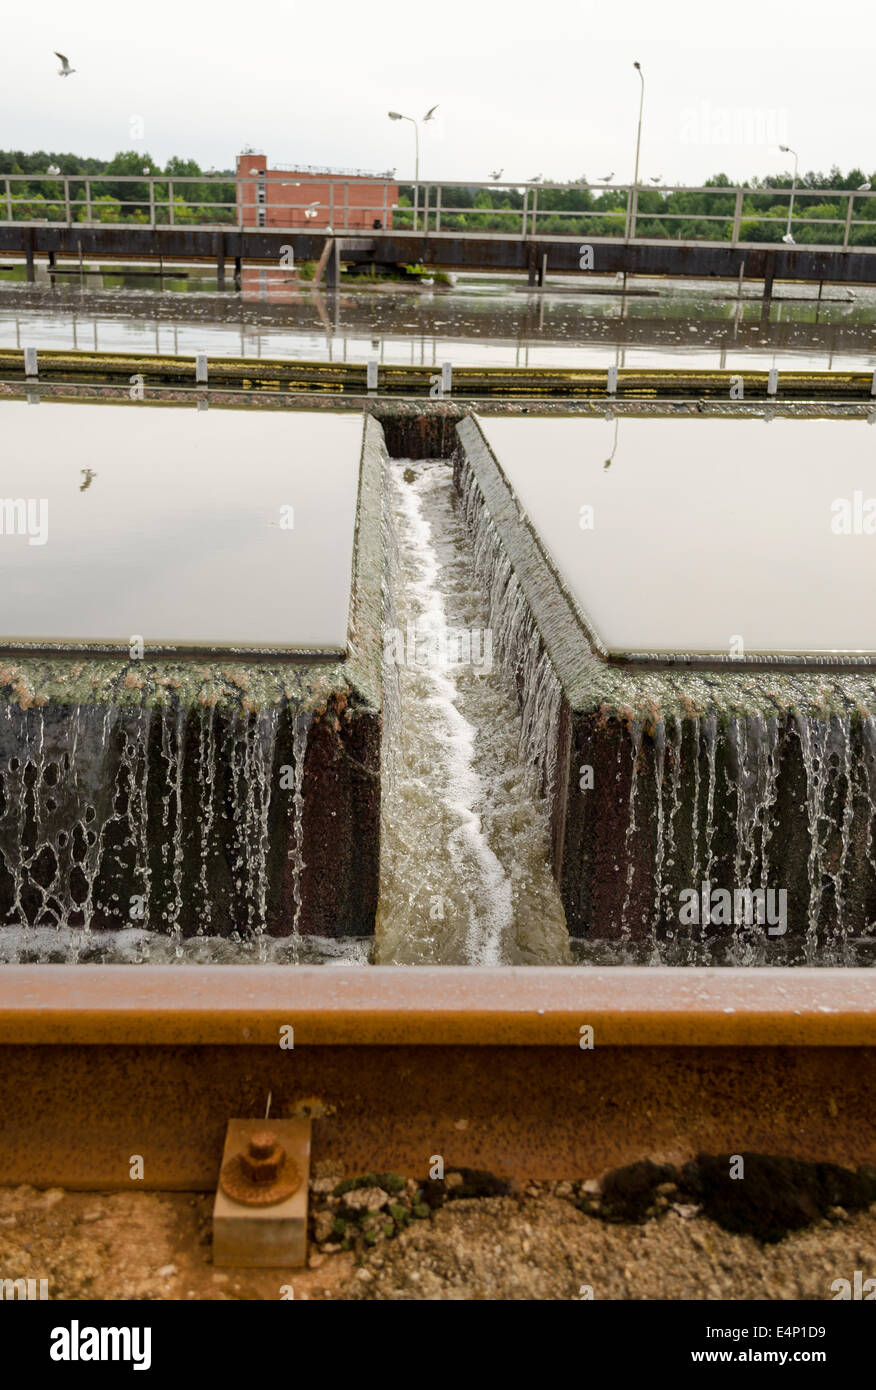 Primary radial settler at wastewater sewage water treatment plant. Stock Photo